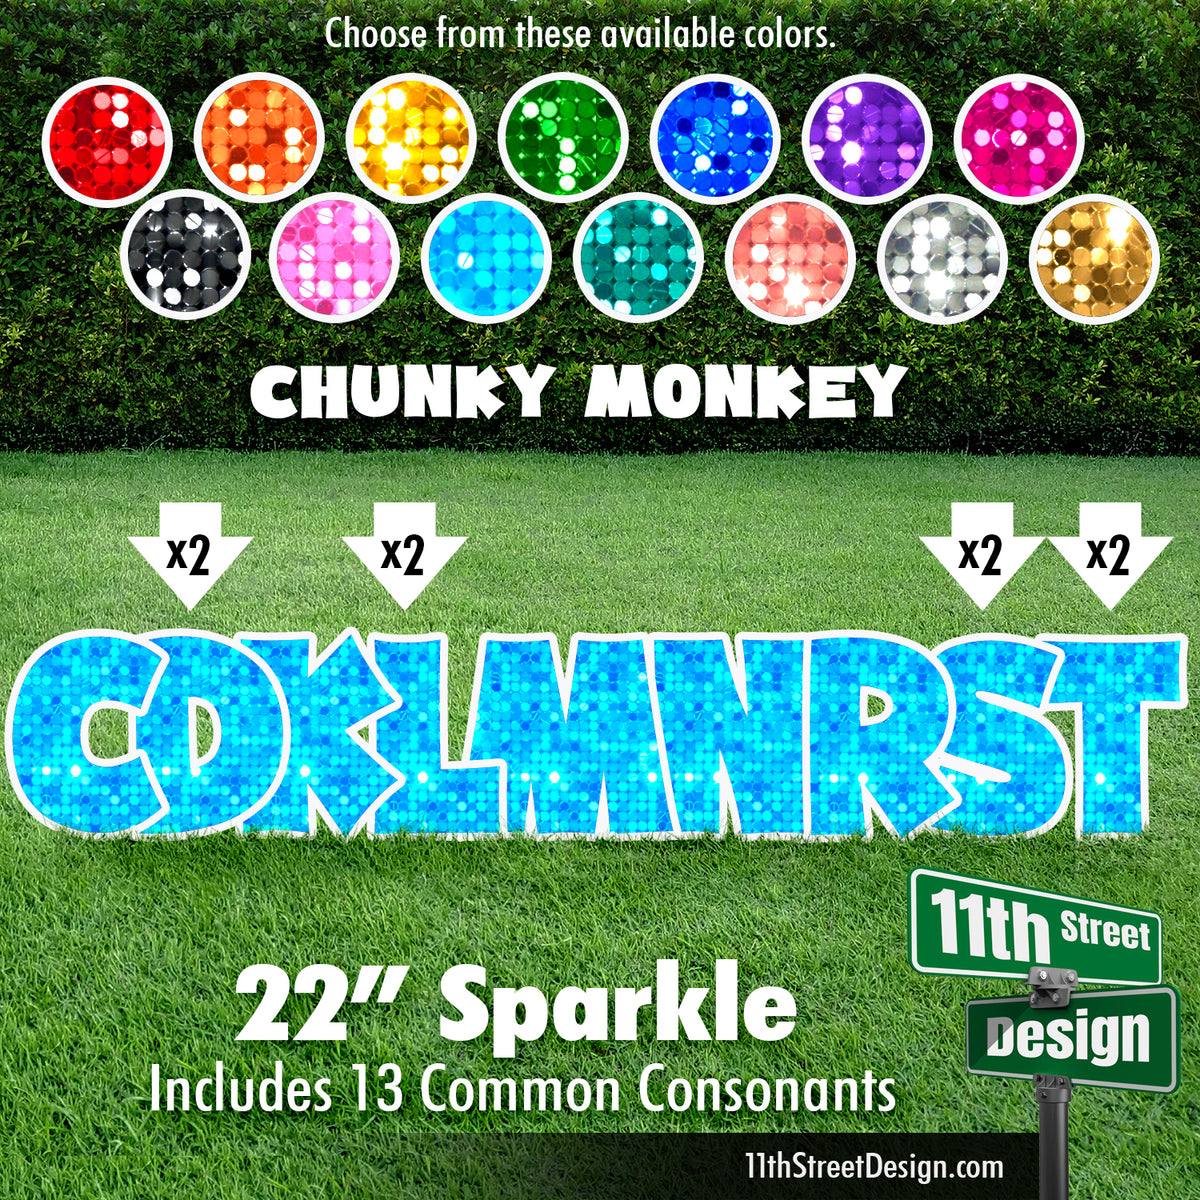 Sparkle 22&quot; Chunky Monkey Yard Card Set Includes 13 Common Consonants